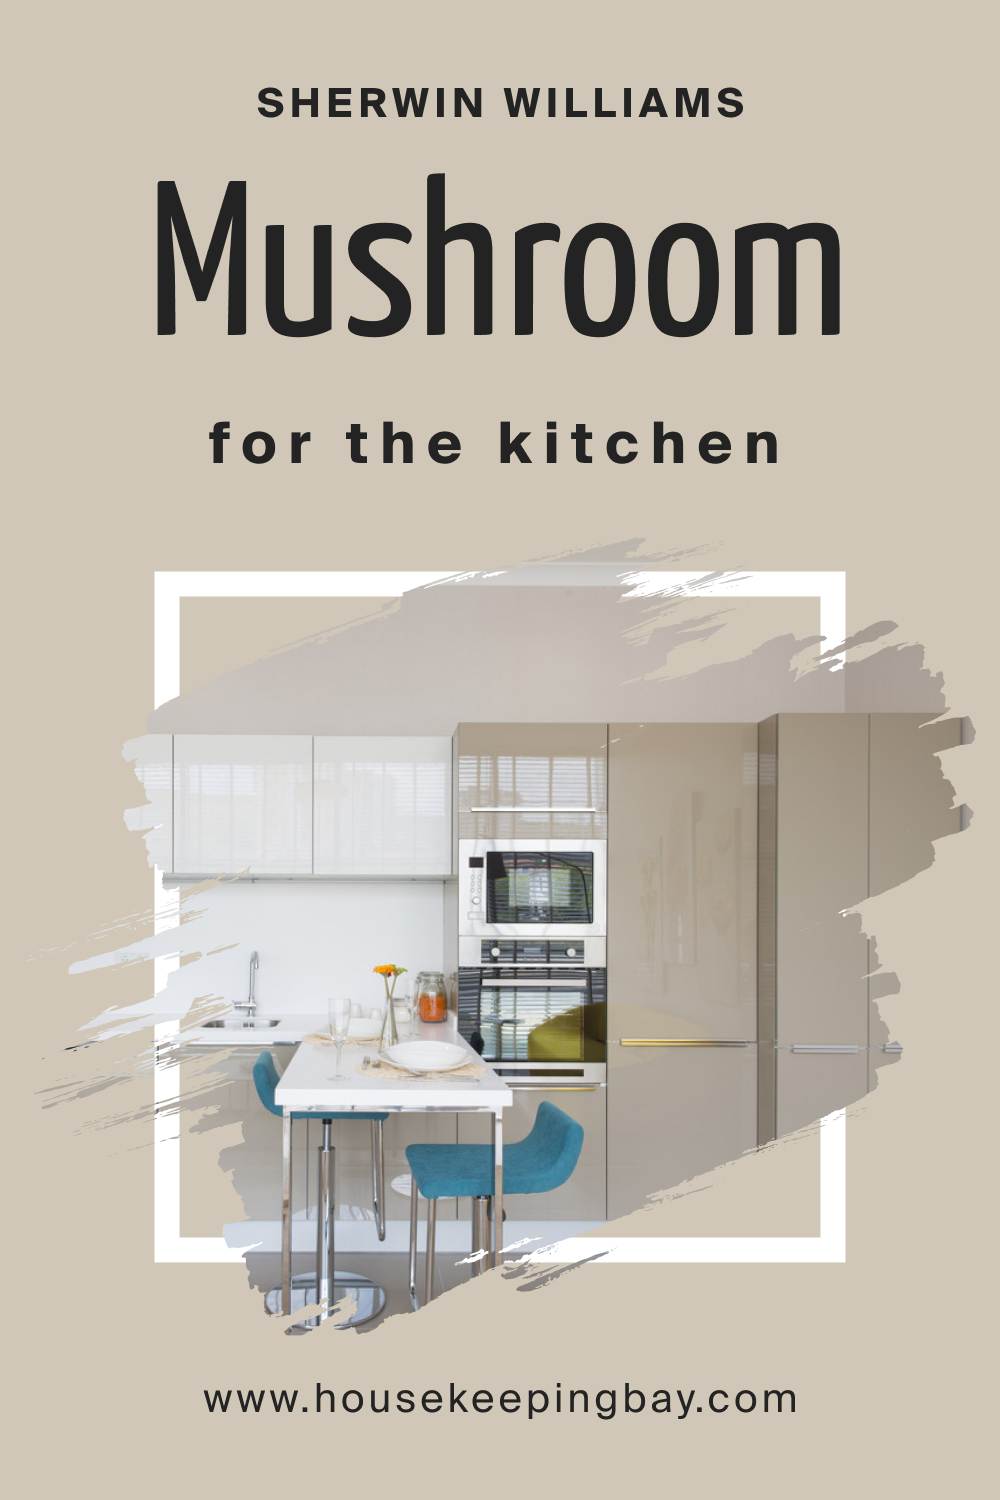 Sherwin Williams. SW Mushroom For the Kitchen